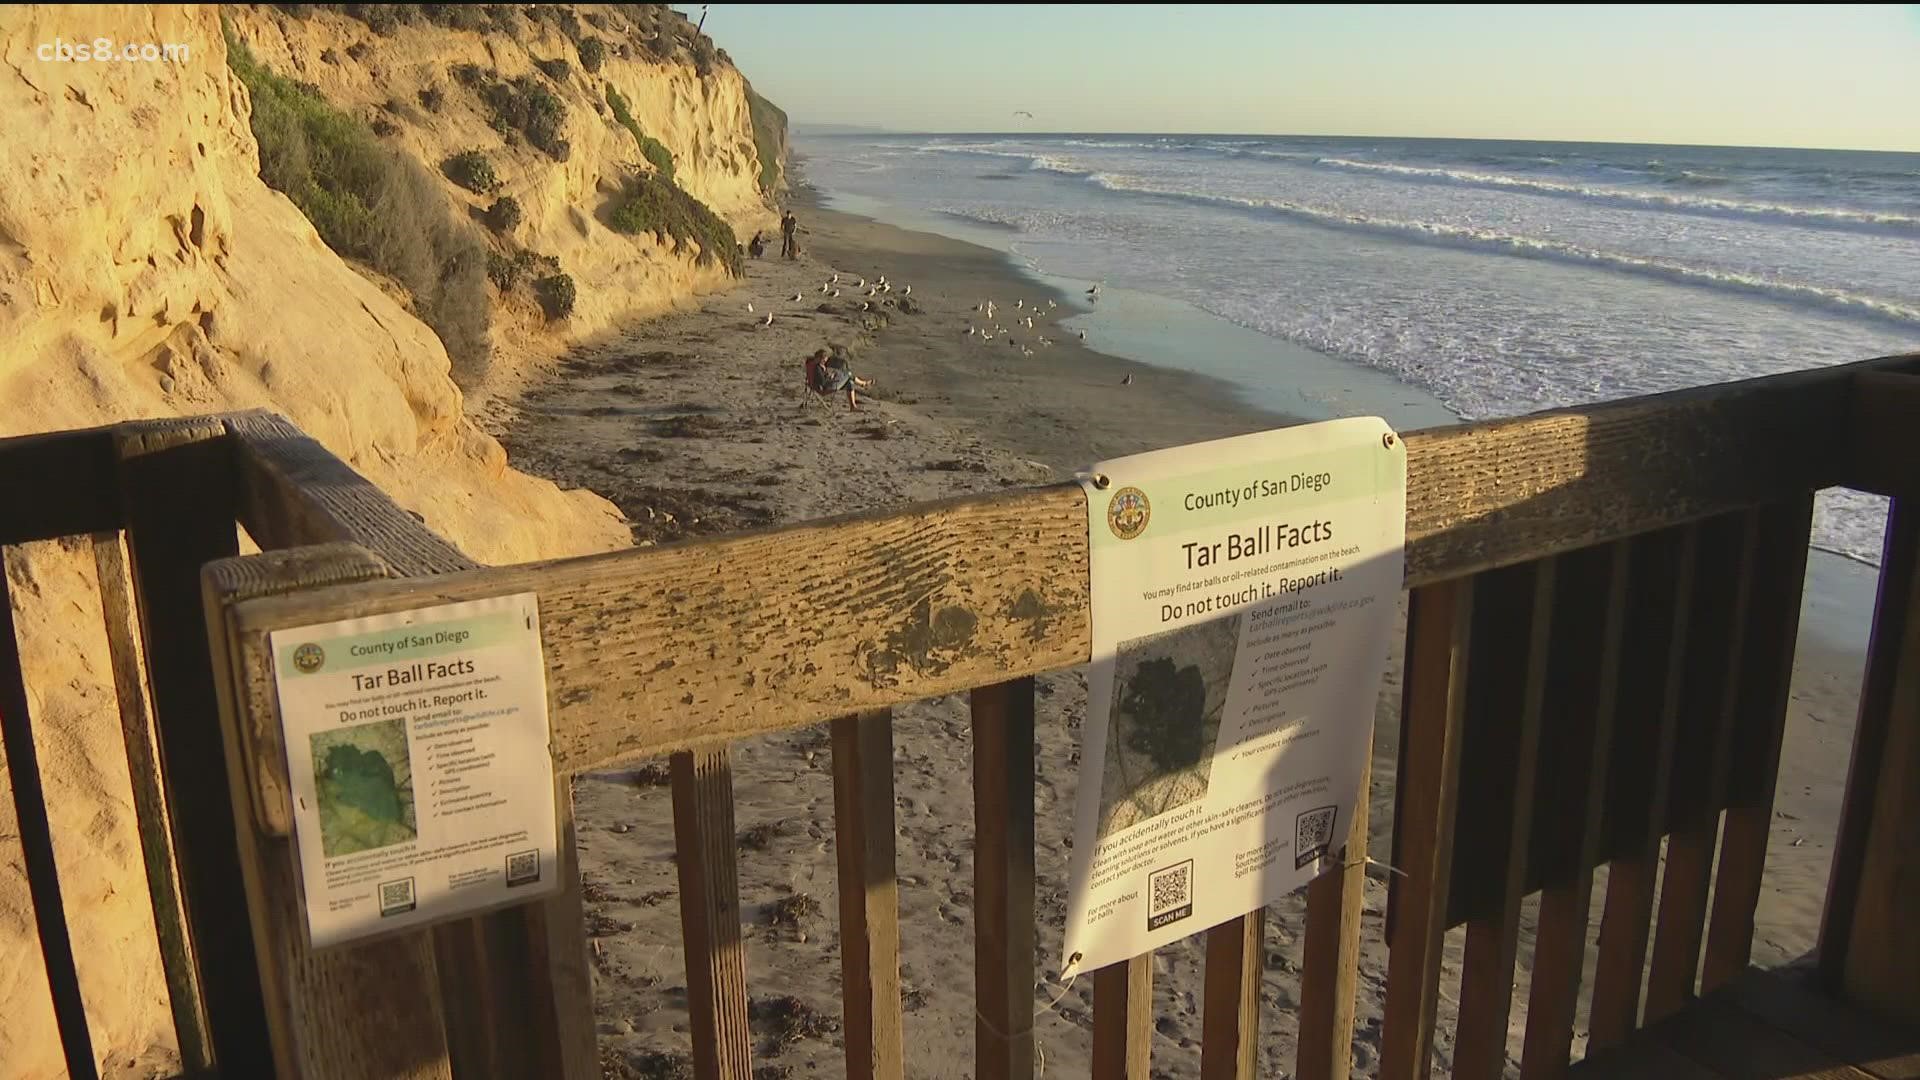 Oil-related contaminants and tar balls have been reported on several San Diego beaches.